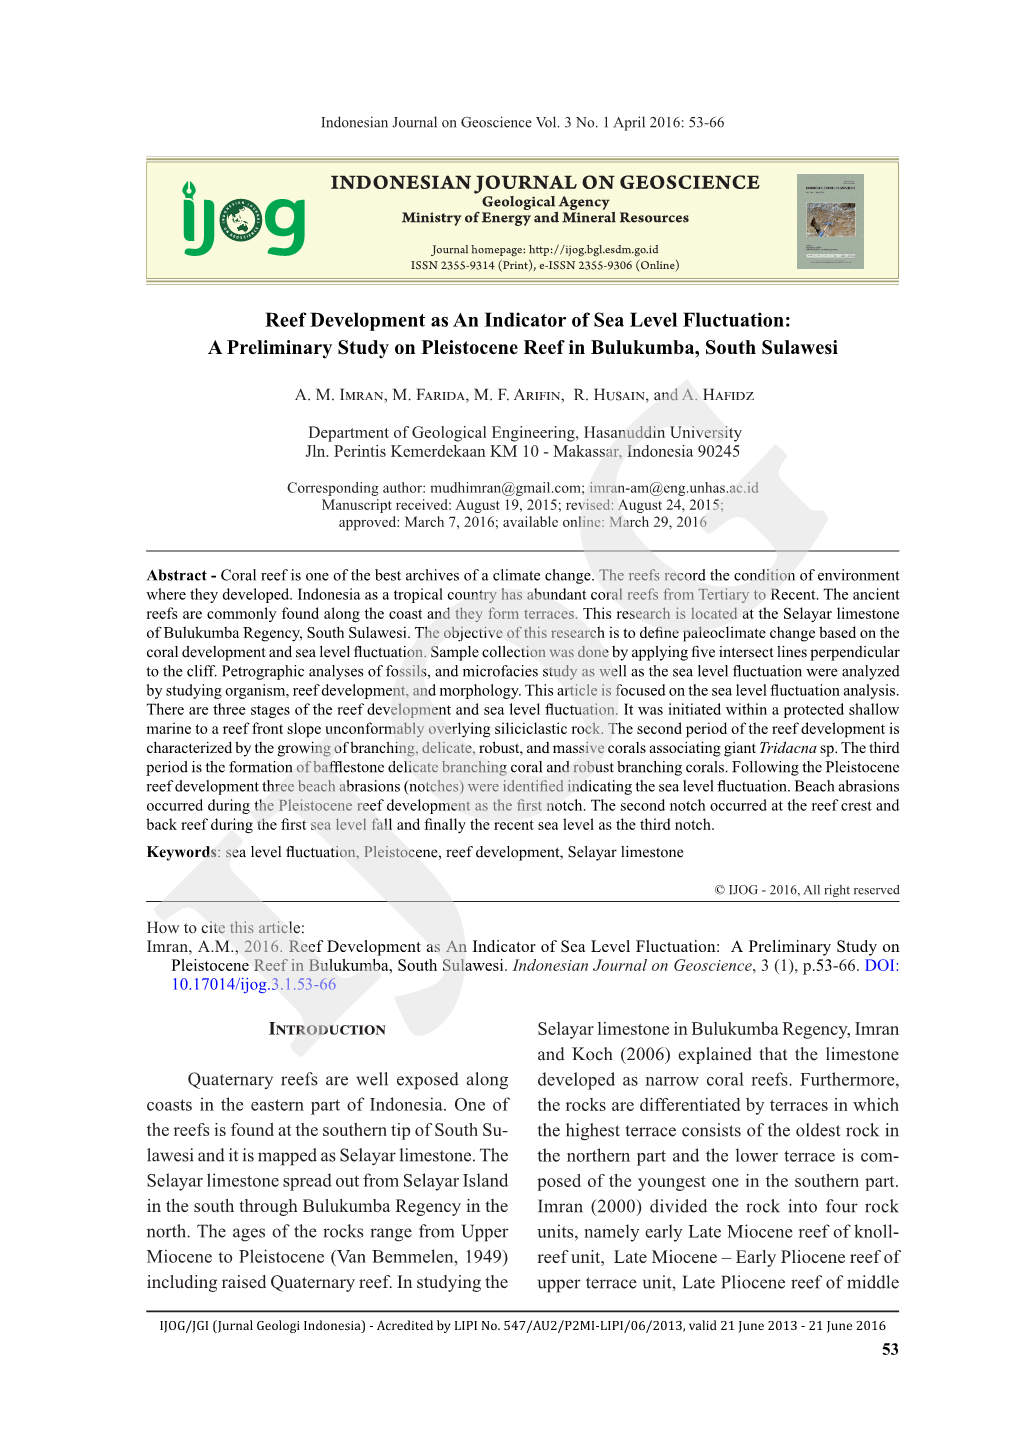 Reef Development As an Indicator of Sea Level Fluctuation: a Preliminary Study on Pleistocene Reef in Bulukumba, South Sulawesi